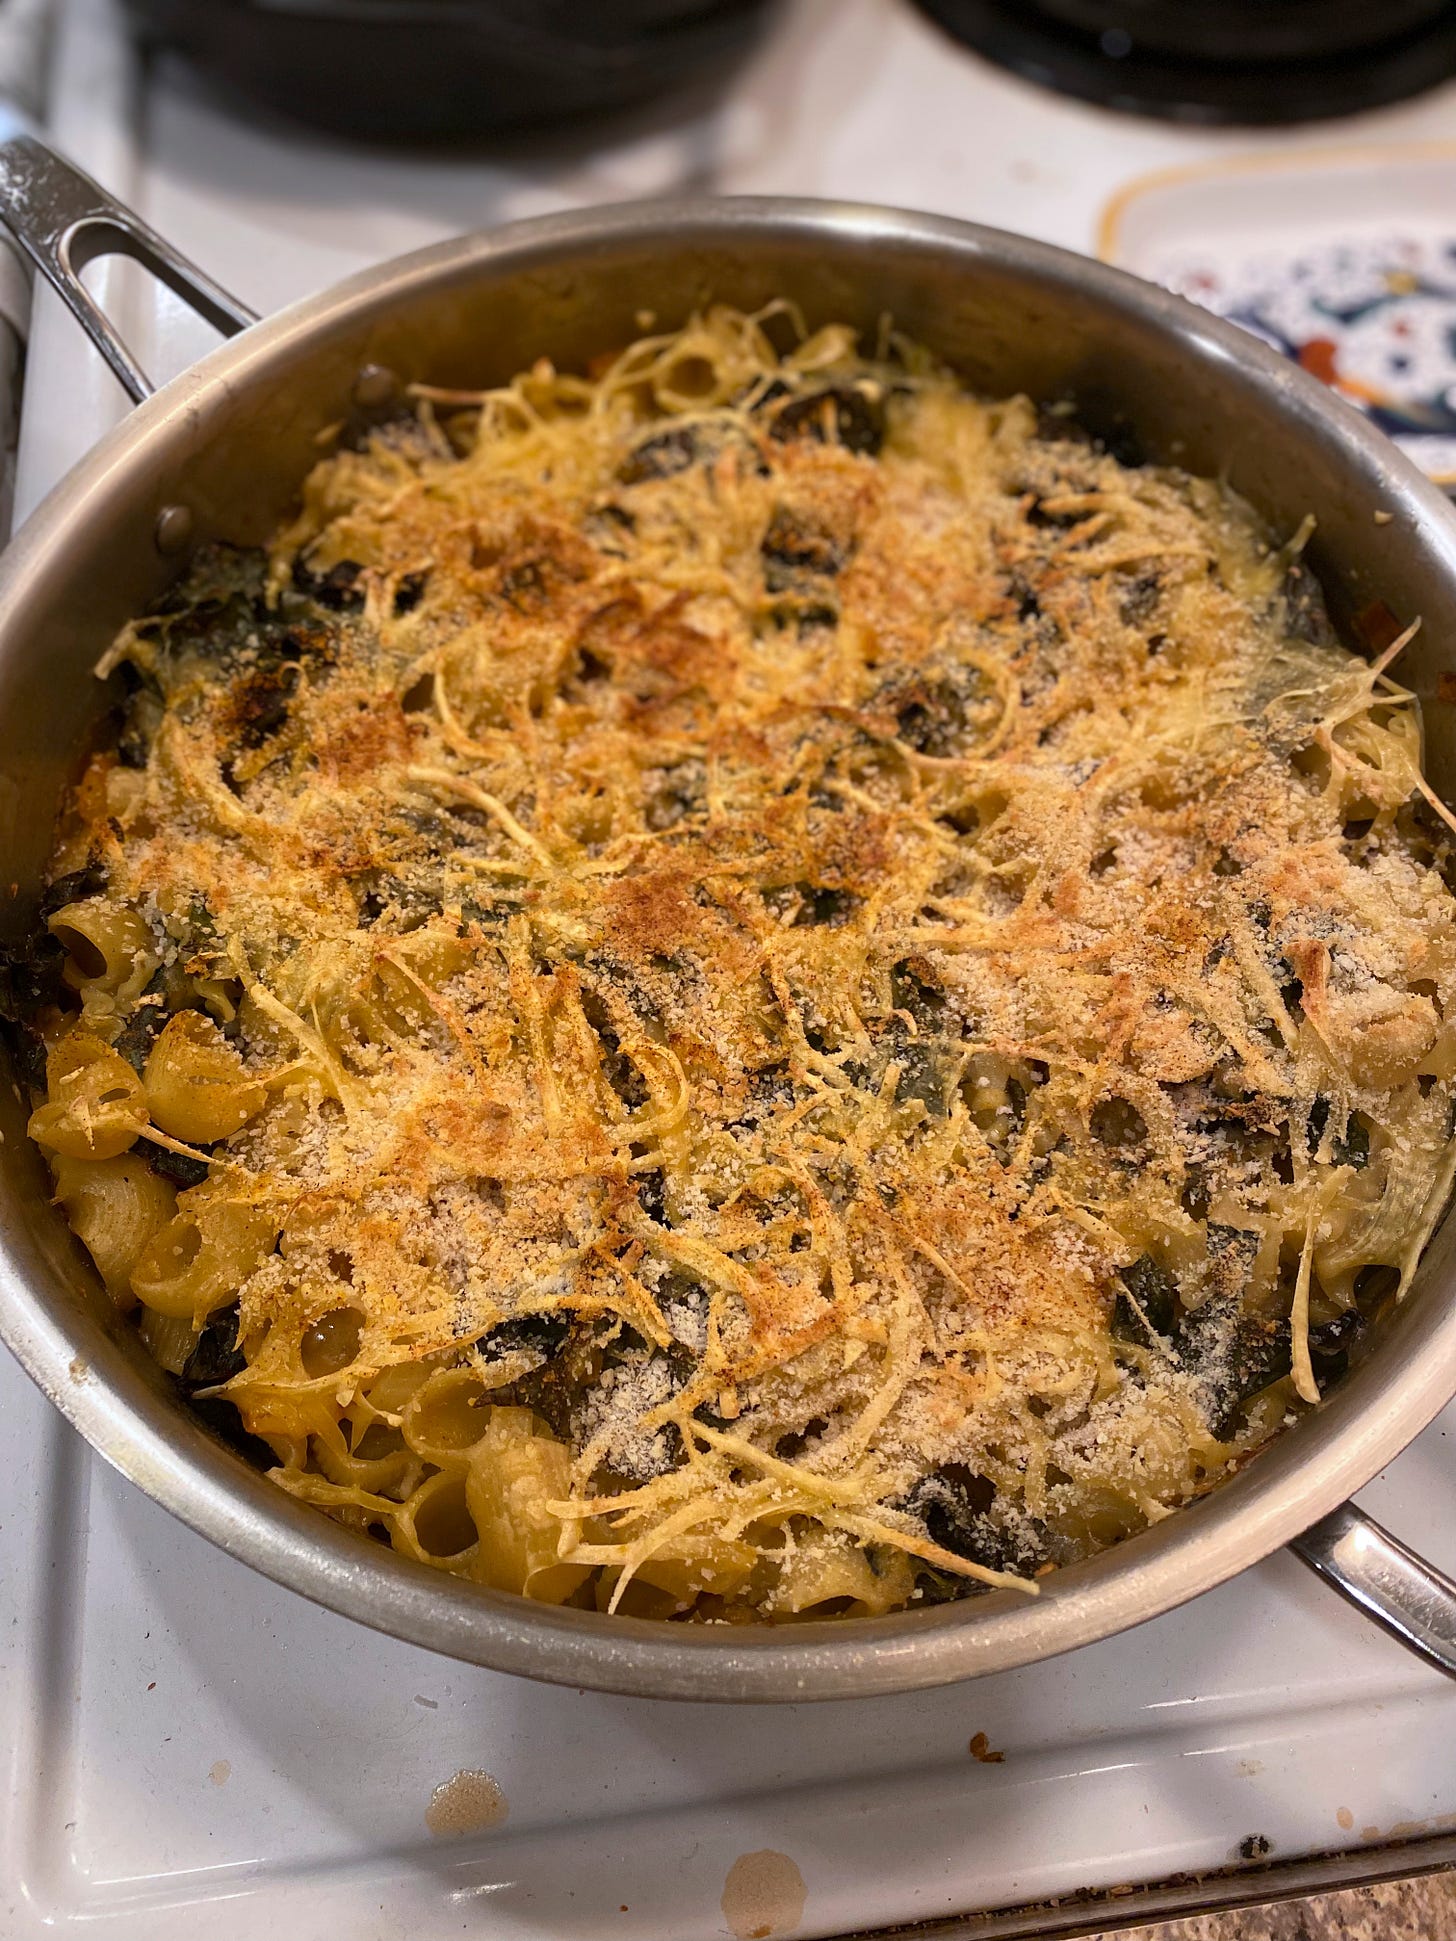 A large stainless steel pan of vegan mac & cheeze with toasty breadcrumbs on top. Pieces of swiss chard are visible throughout.